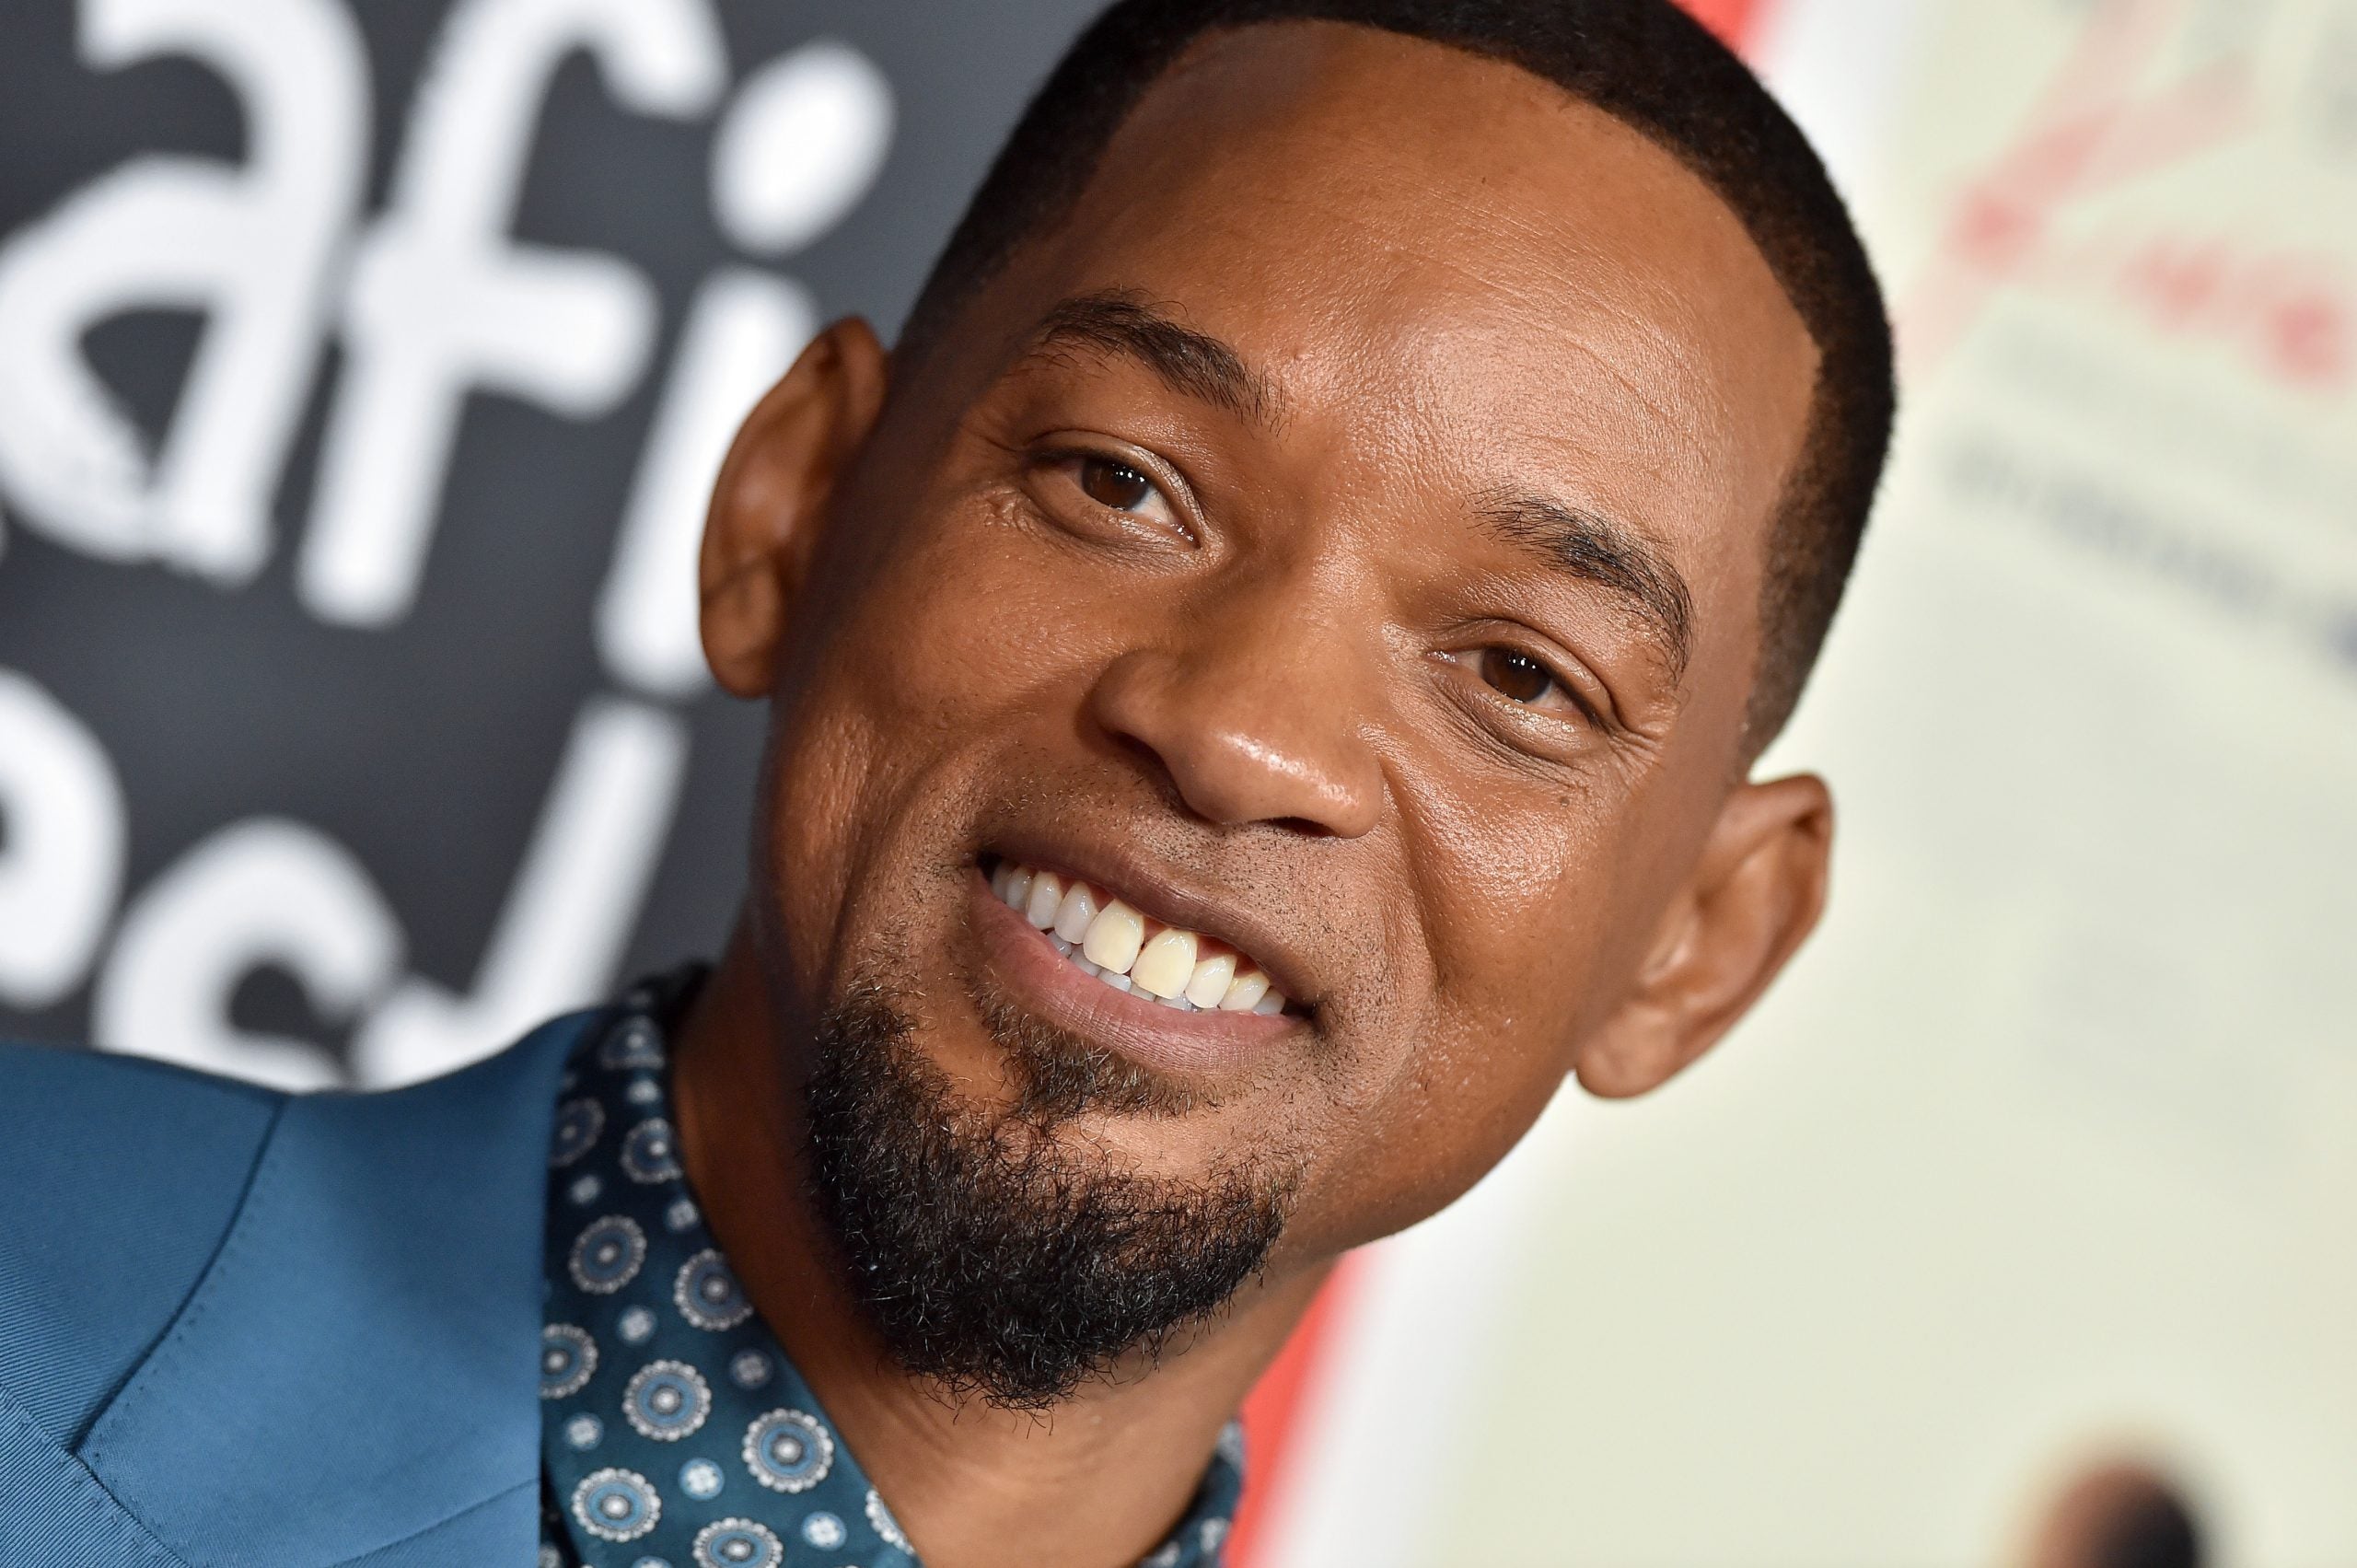 Watch: Will Smith Narrates New Teaser For ‘Bel-Air’ On Peacock